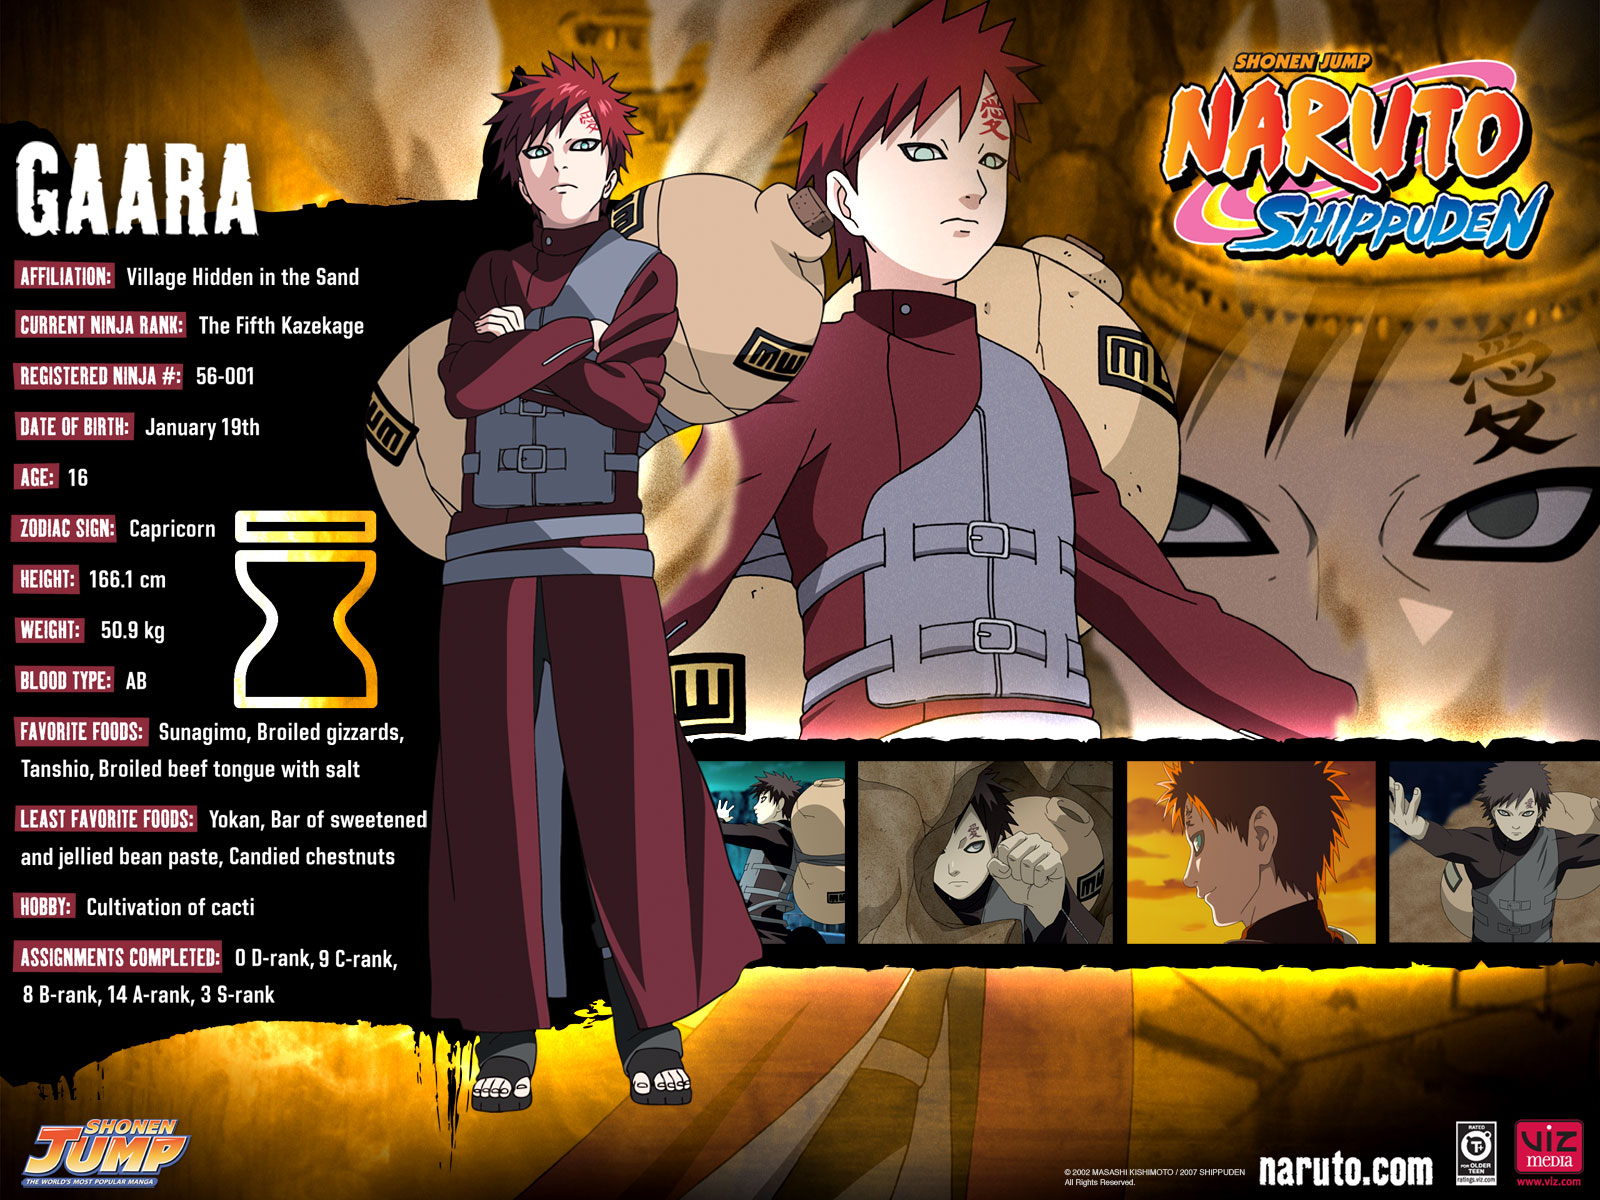 19 Leaked Wallpapers anime naruto shippuden hd with success  